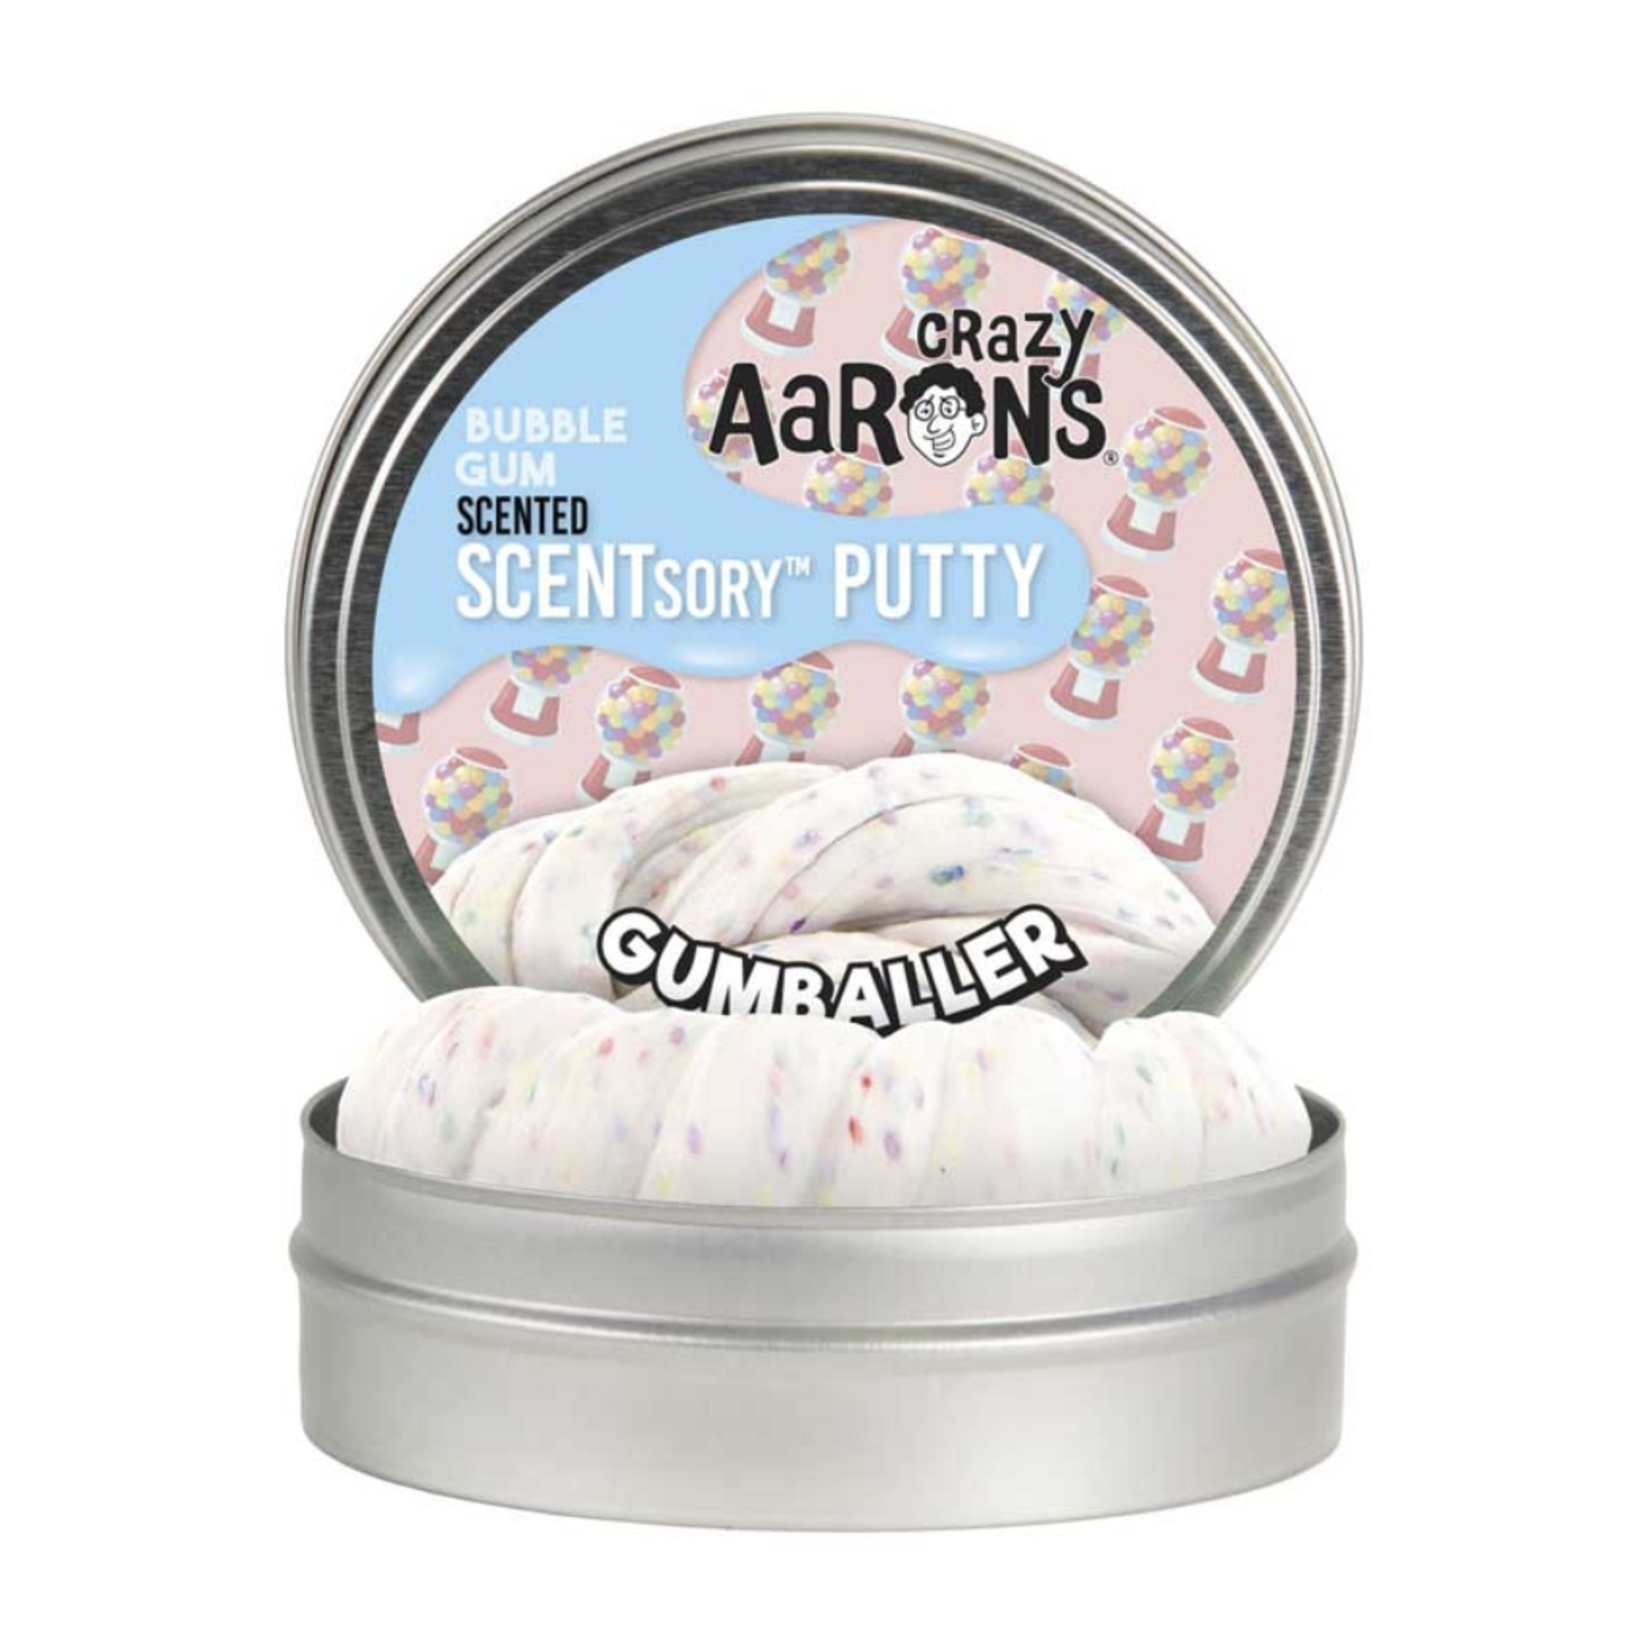 Crazy Aarons Scentsory Gumballer-Thinking Putty Tin